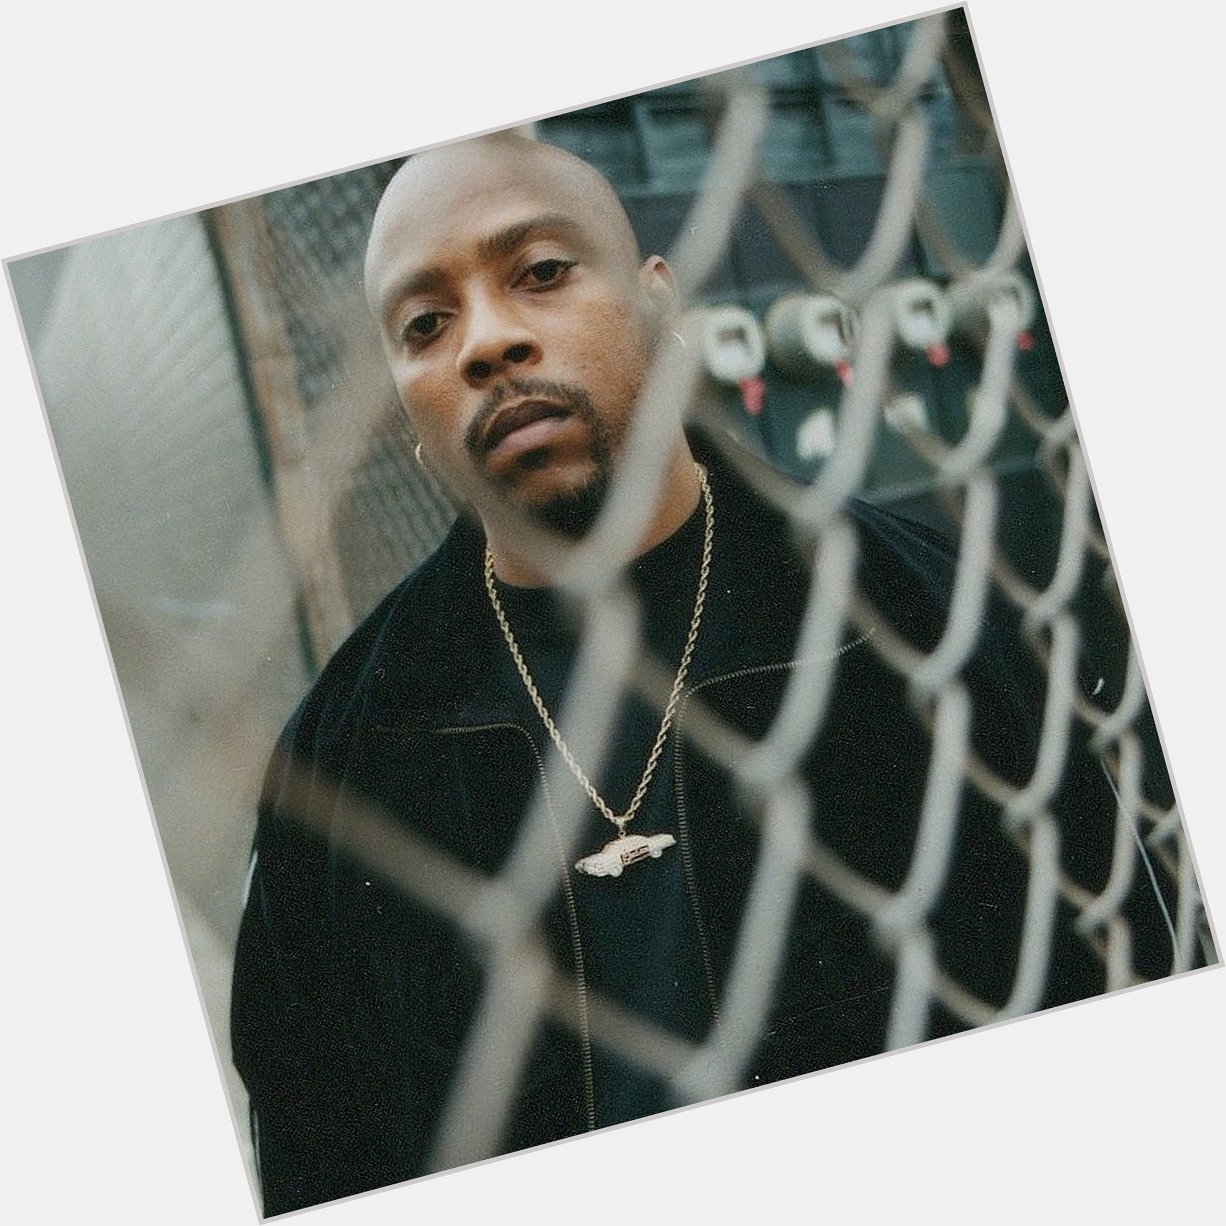 HAPPY BIRTHDAY NATE DOGG
1 OF MY BIGGEST INSPIRATIONS.

YOU INSPIRED A FEW OF MY MELODIES.. 